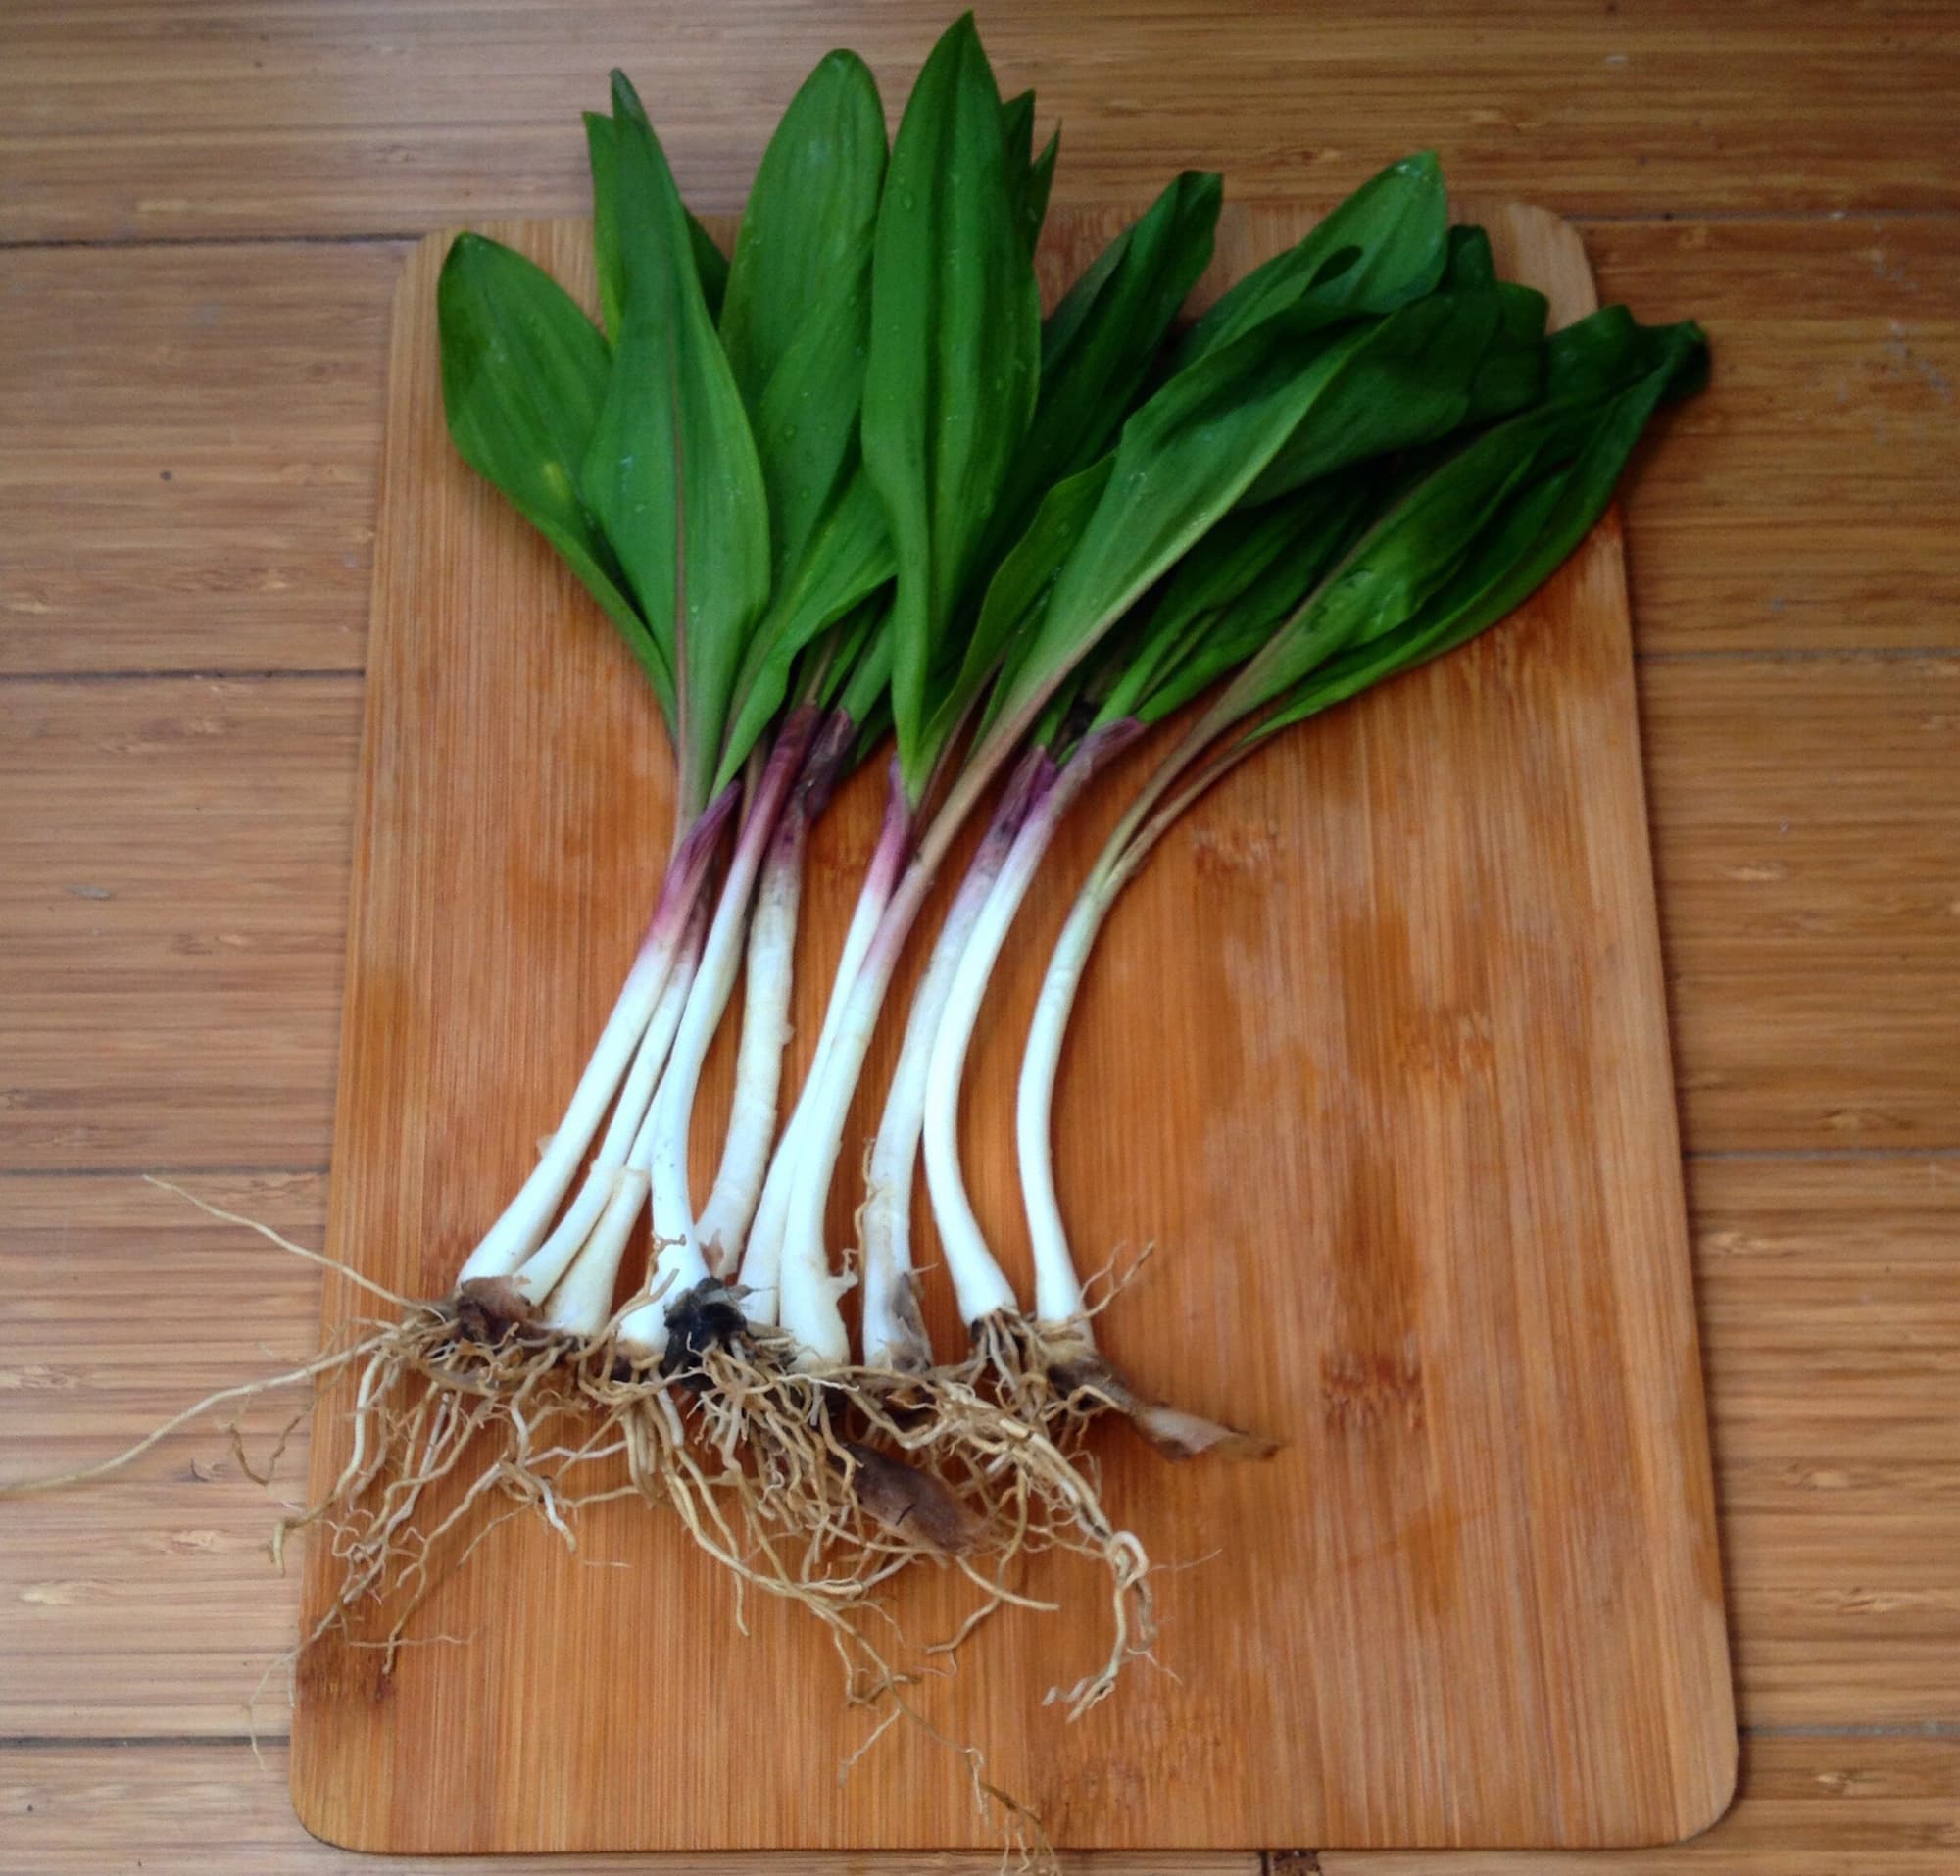 These ramps were ethically and sustainably harvested from an abundant patch by knowledgeable foragers. Always gather conservatively.